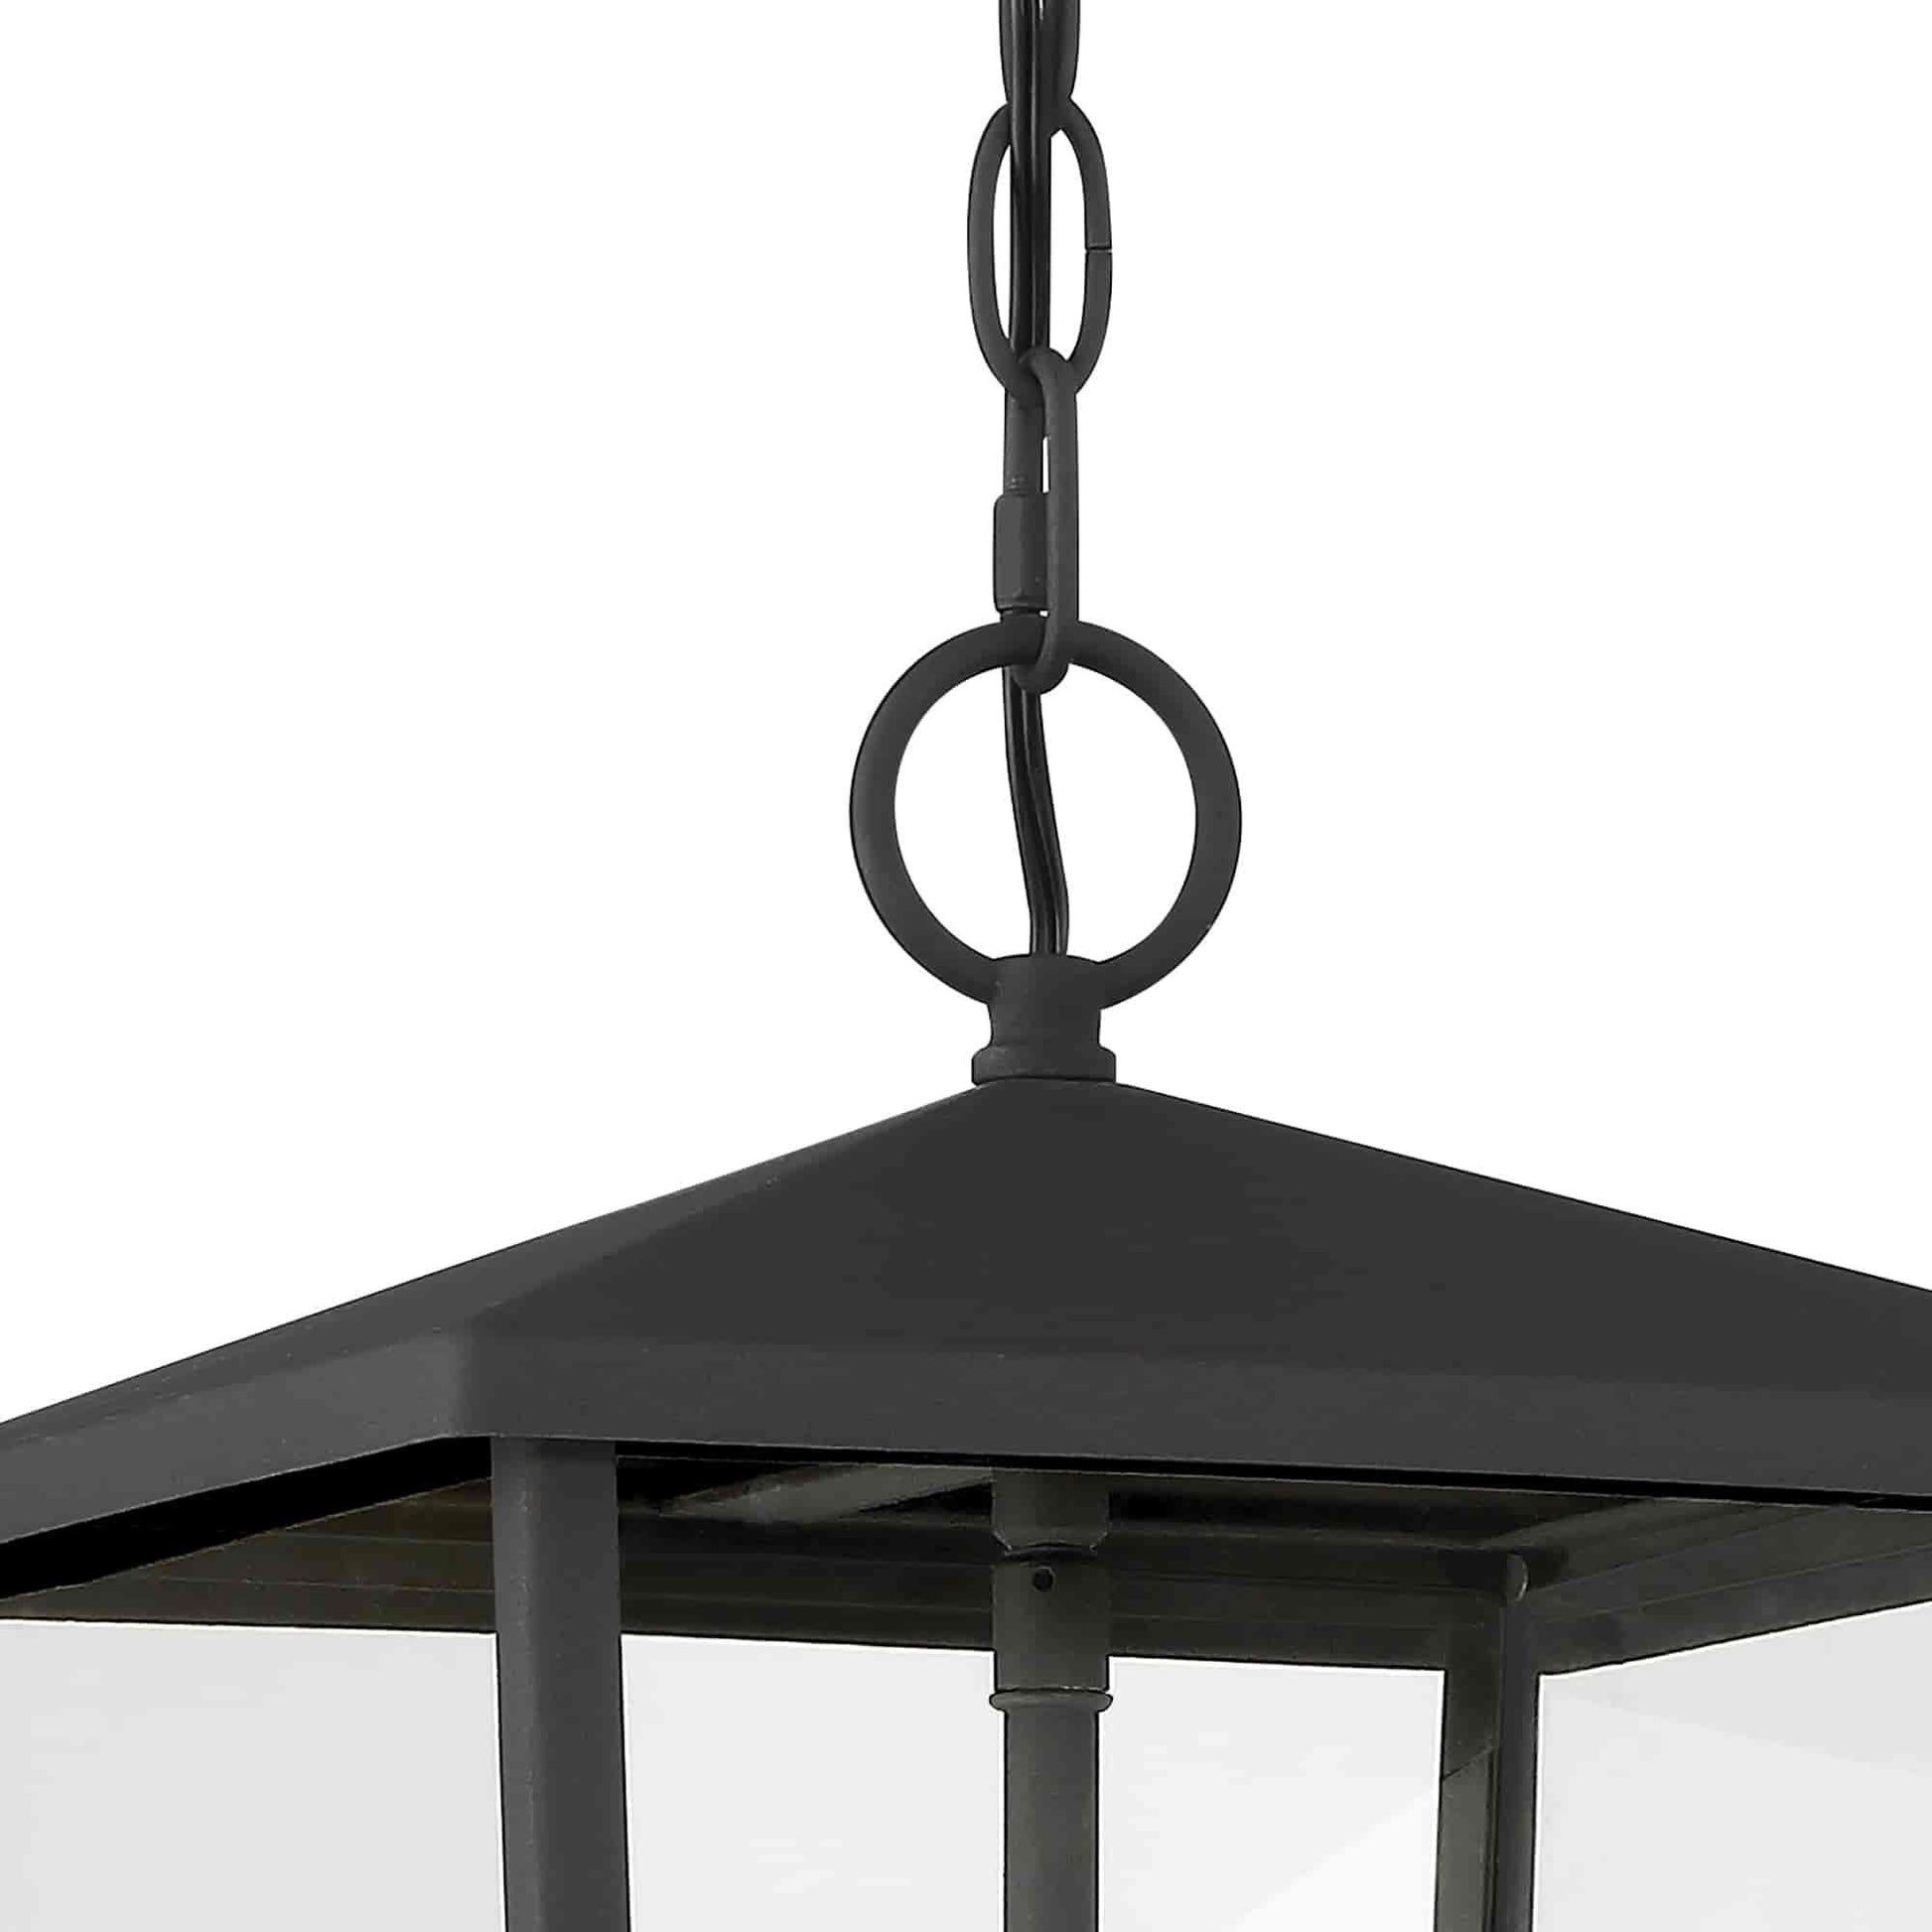 2902 | 2 - Light Outdoor Lantern Chandelier by ACROMA™  UL - ACROMA